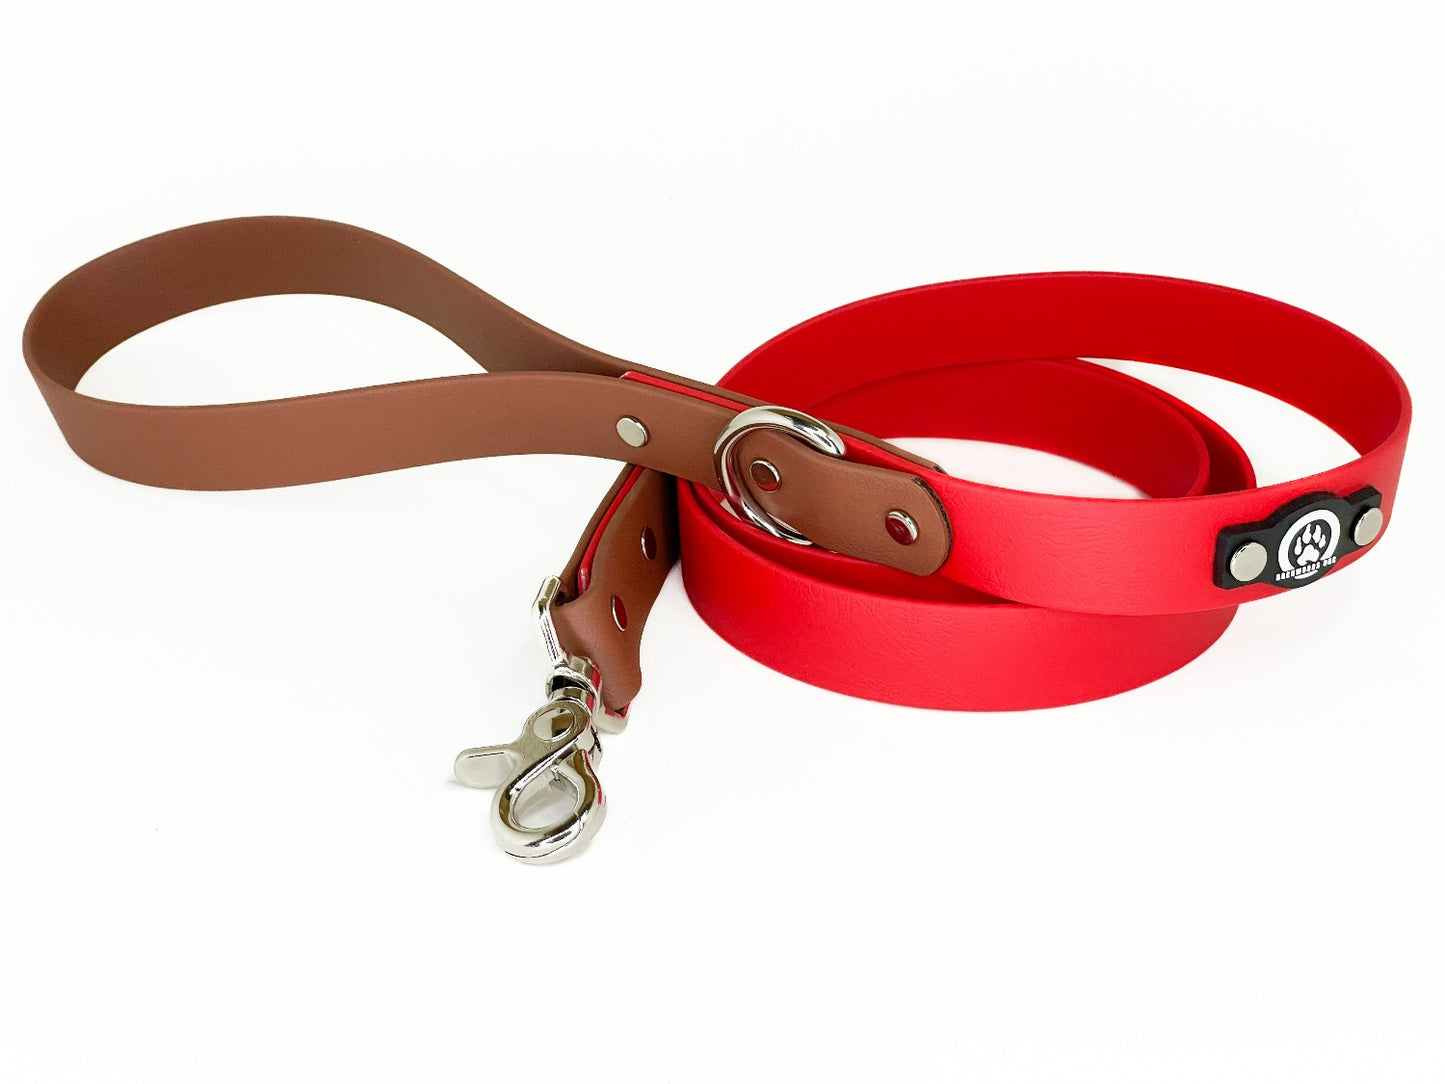 Backqoods Dog BioThane Waterproof two-tone dog leash in red and brown